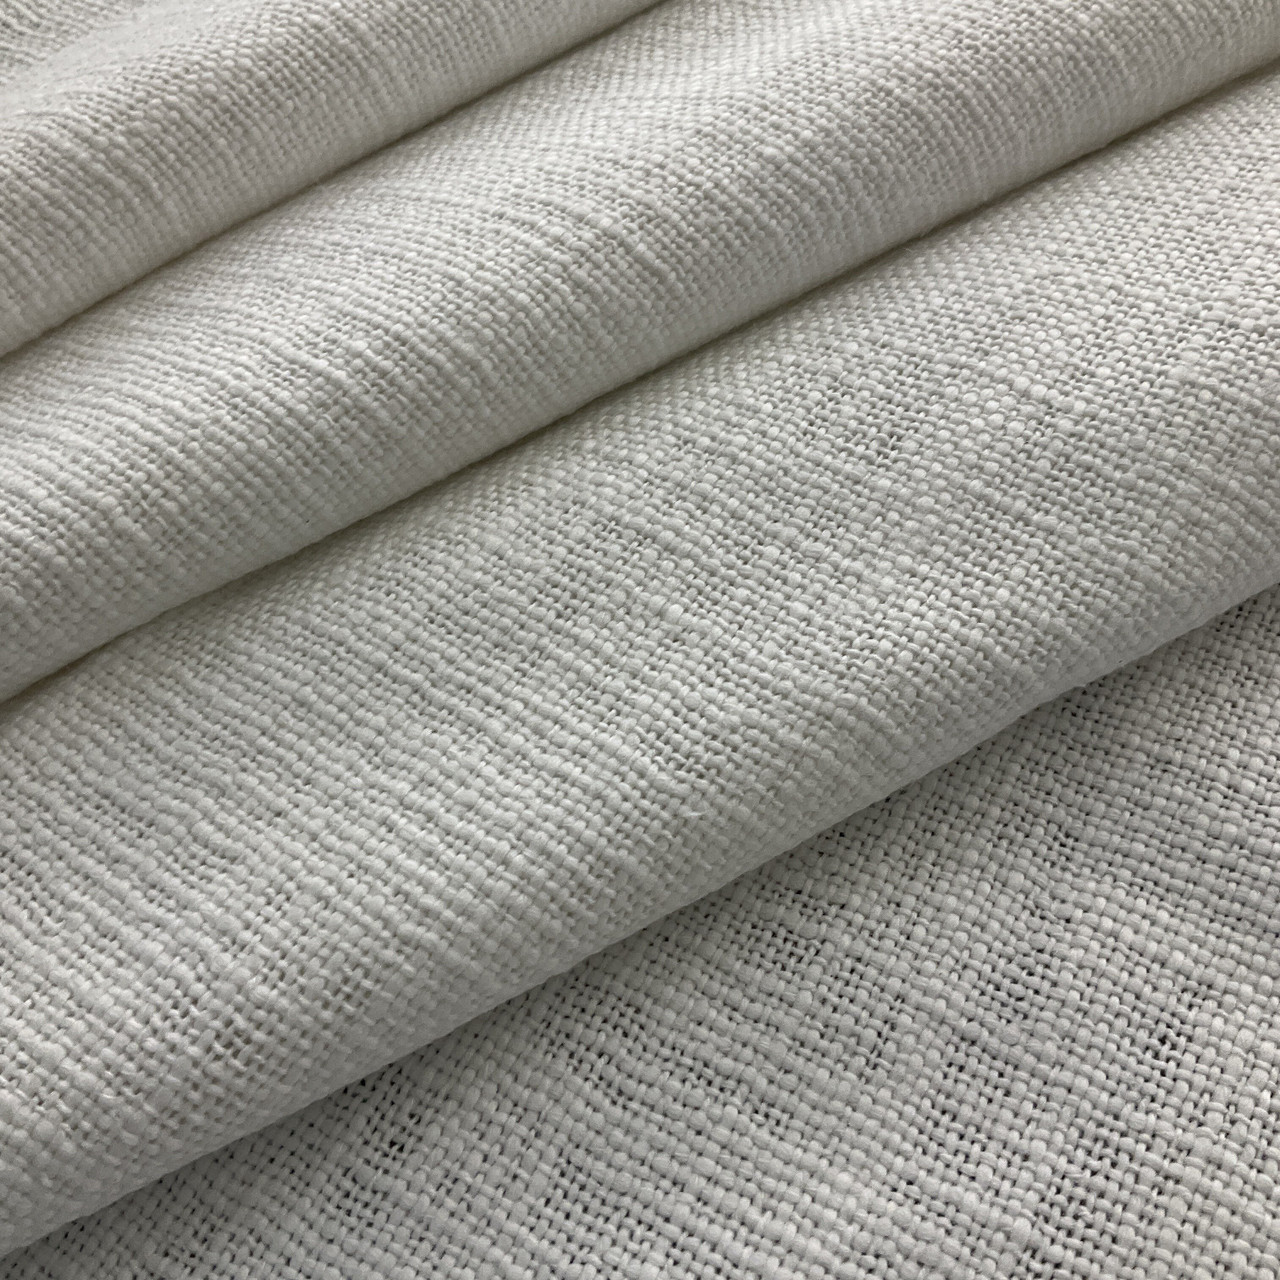 Number One Textiles Solid Slub Cotton Woven White | Medium Weight Woven  Fabric | Home Decor Fabric | 54 Wide